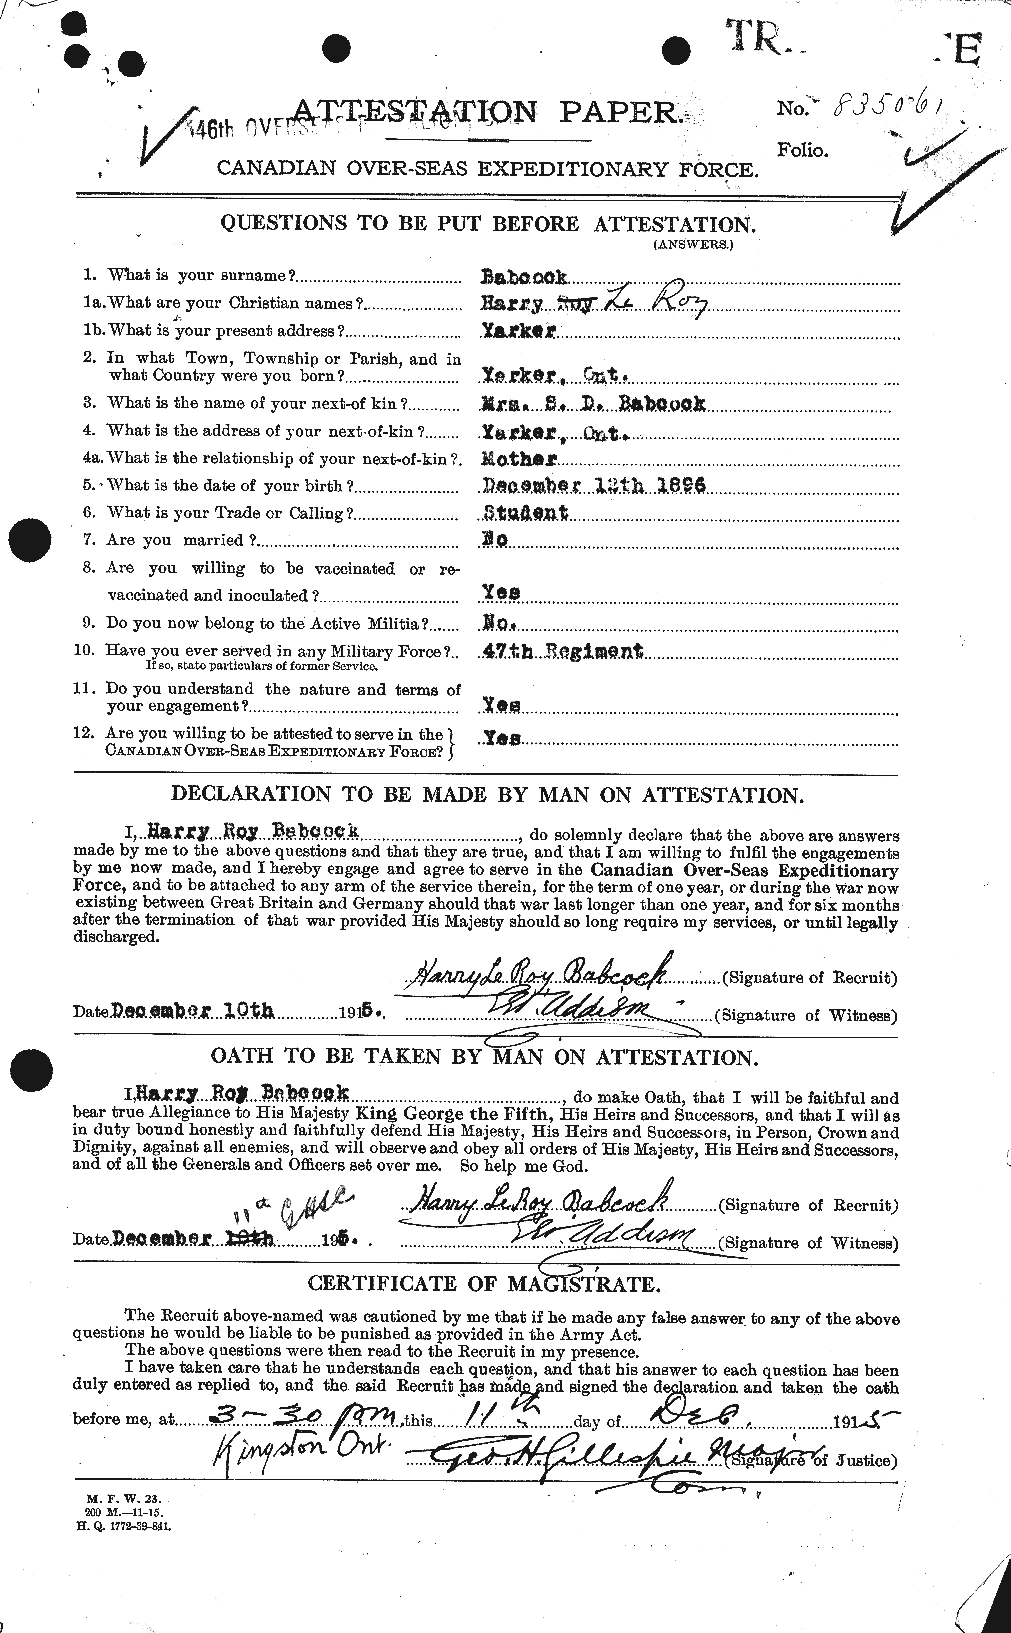 Personnel Records of the First World War - CEF 218237a